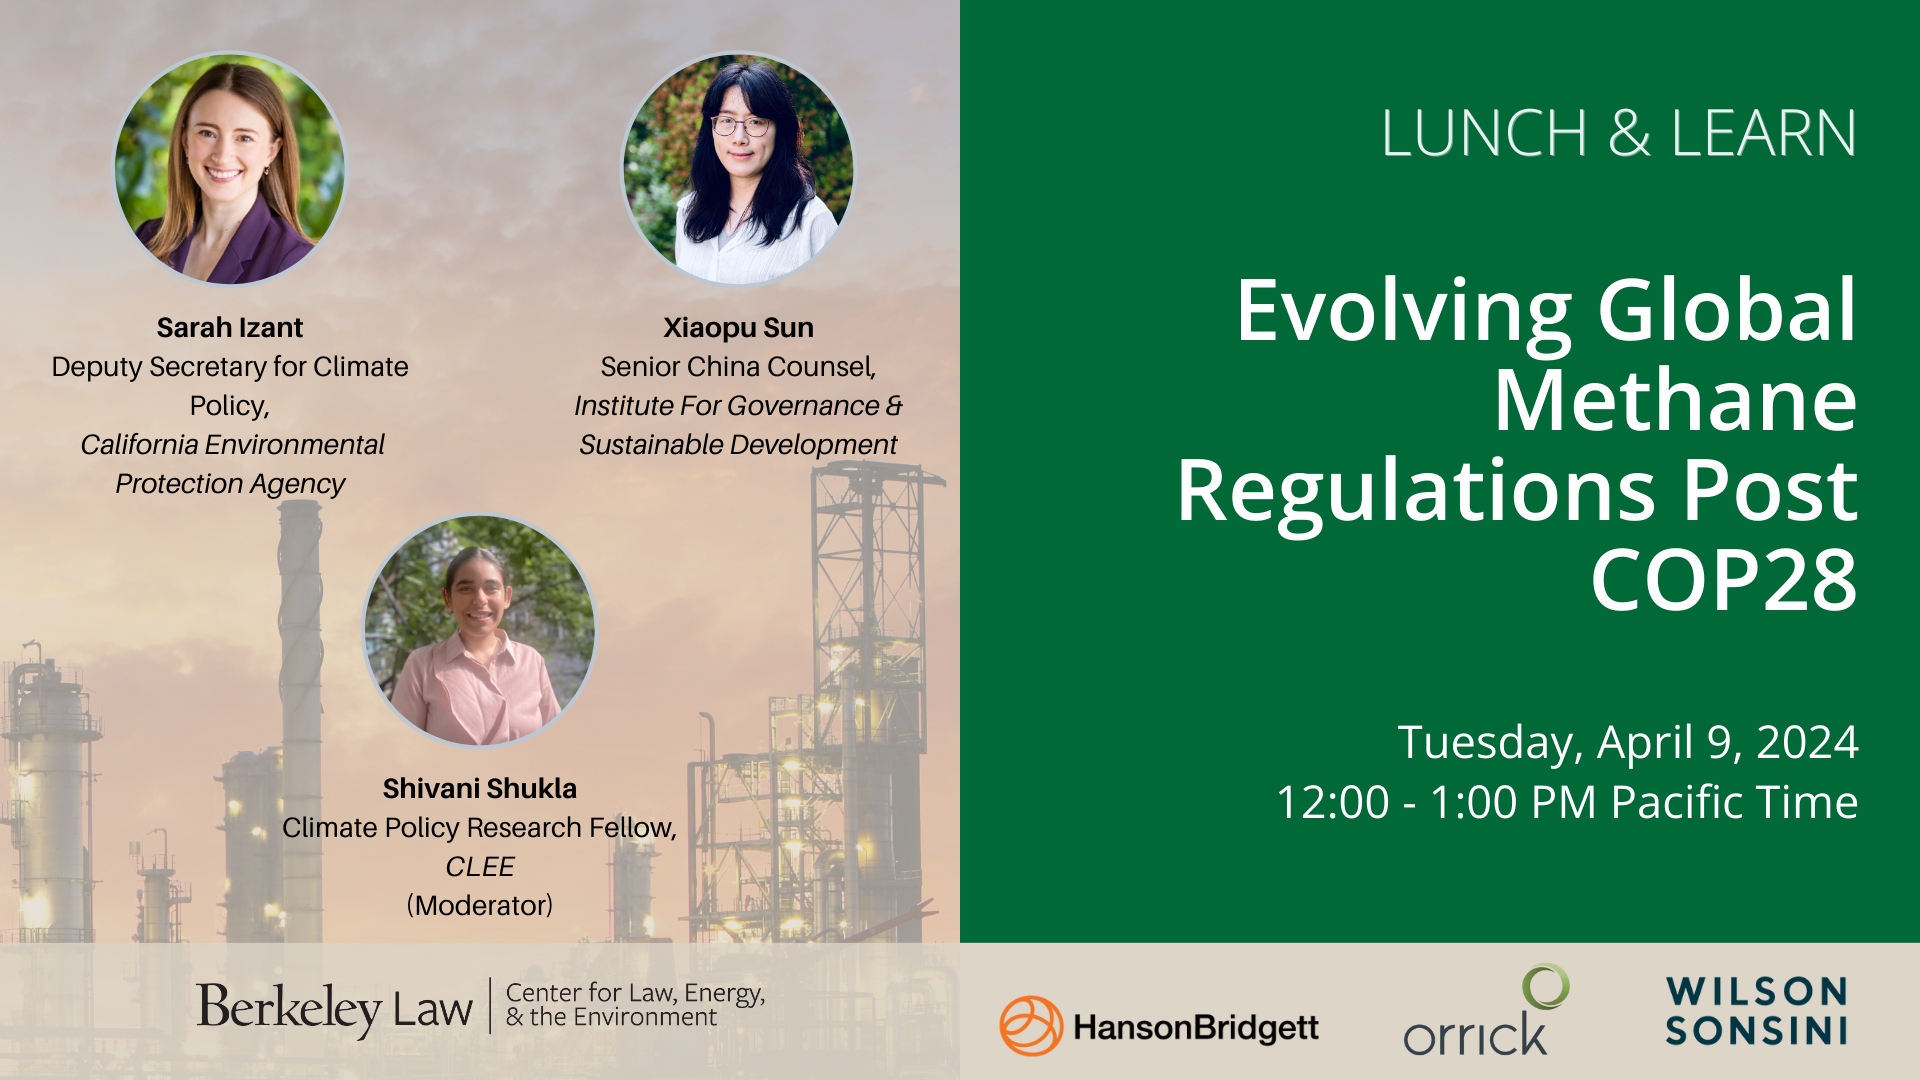 Lunch & Learn: Evolving Global Methane Regulations Post COP28 on a green background with our three panelists listed on the left.